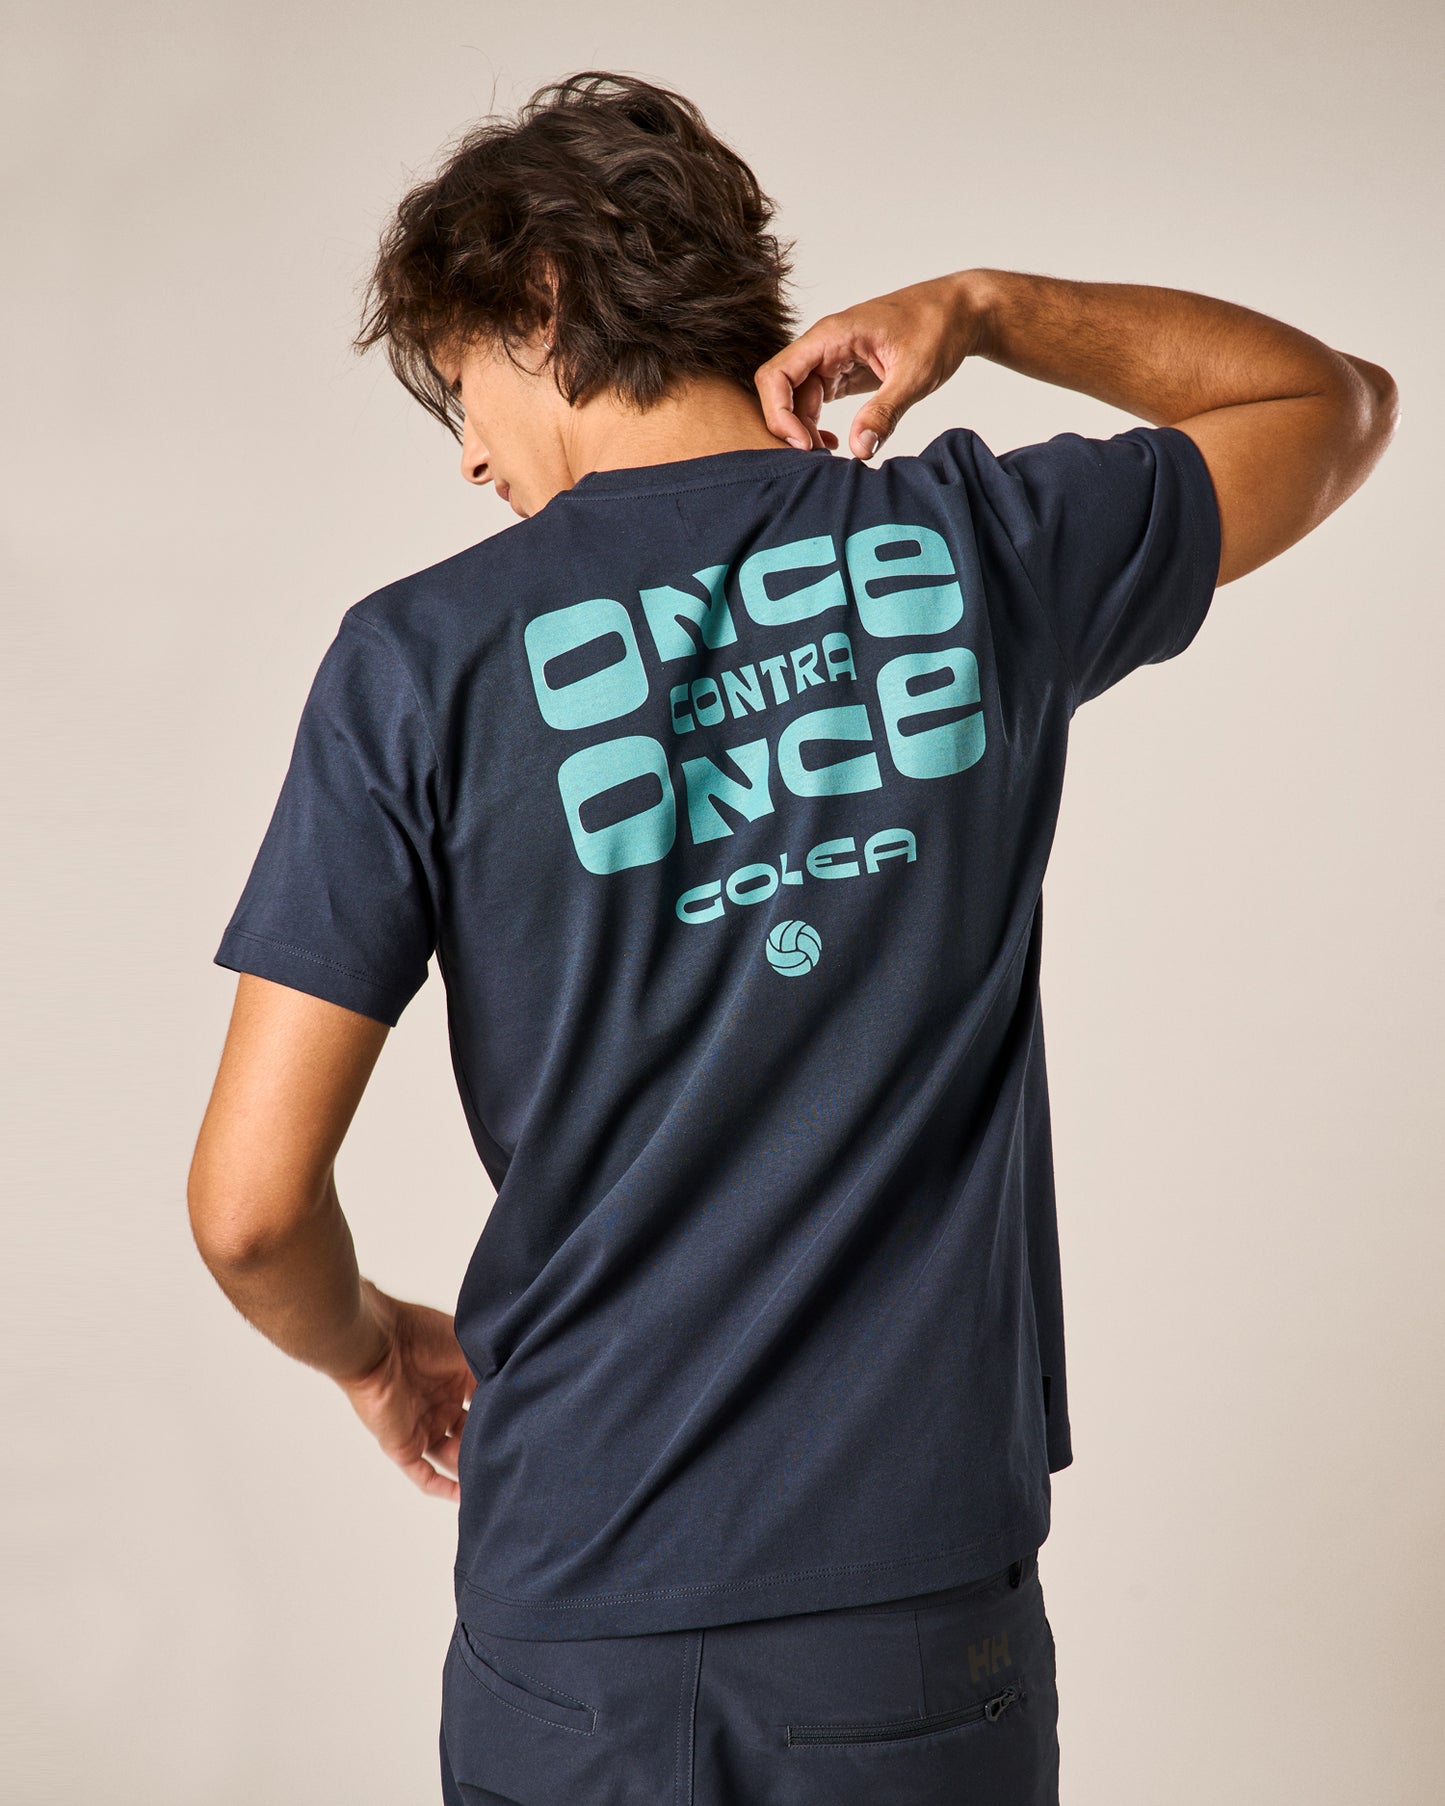 Camiseta azul Once contra Once